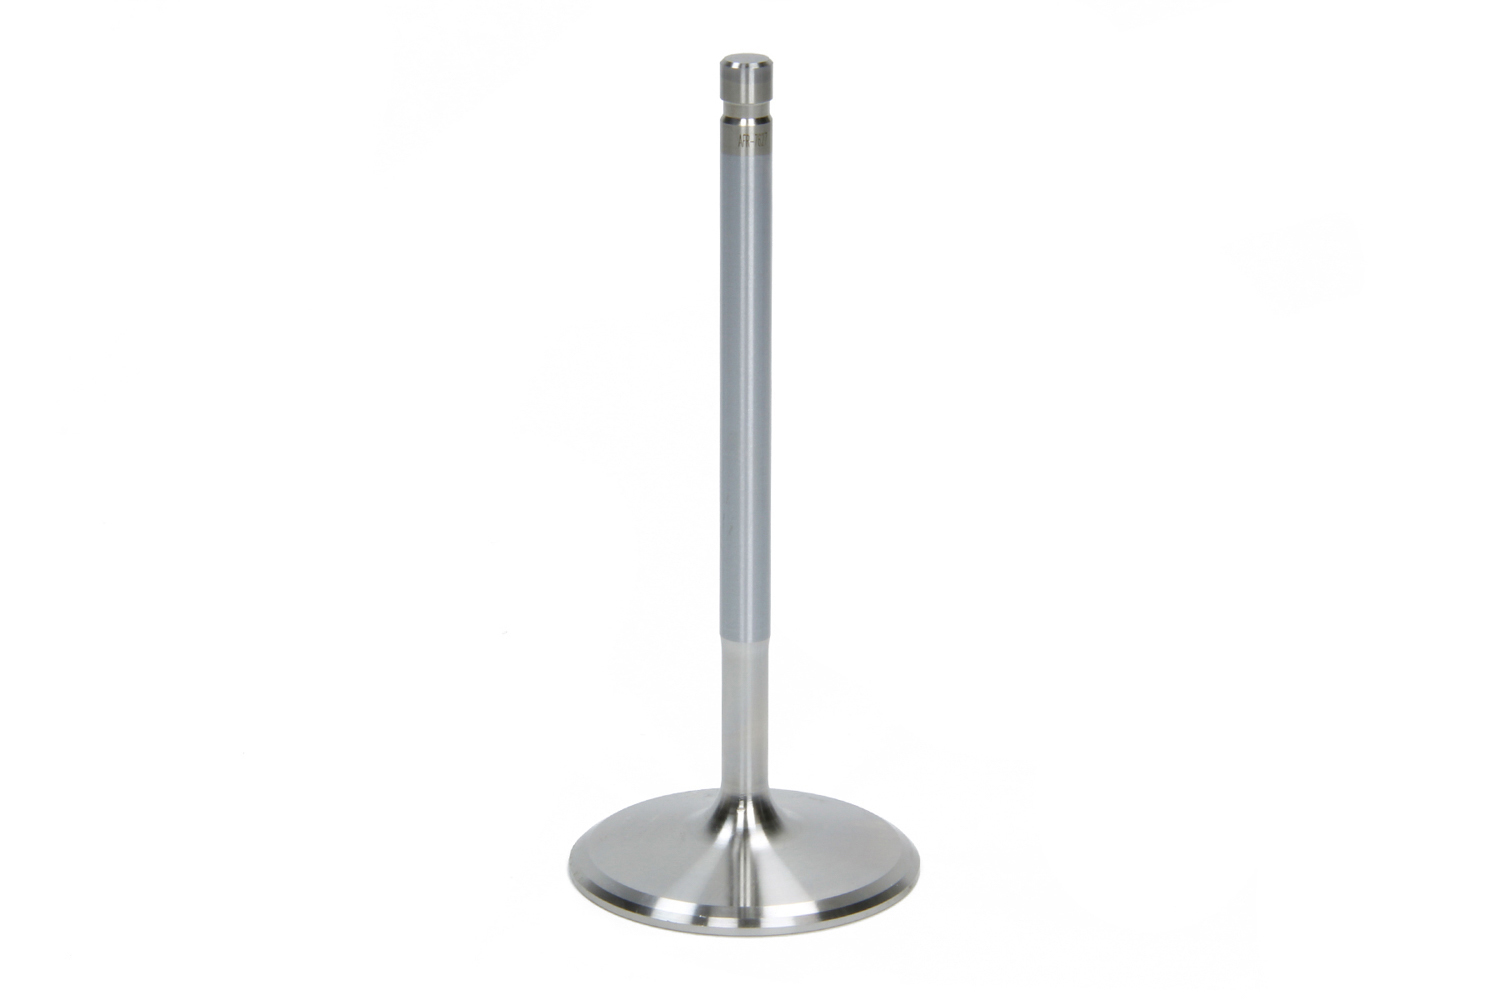 Air Flow Research 7207-1 Intake Valve, LSx, 2.020 in Head, 8 mm Stem, 4.900 in Long, Stainless, GM LS-Series, Each